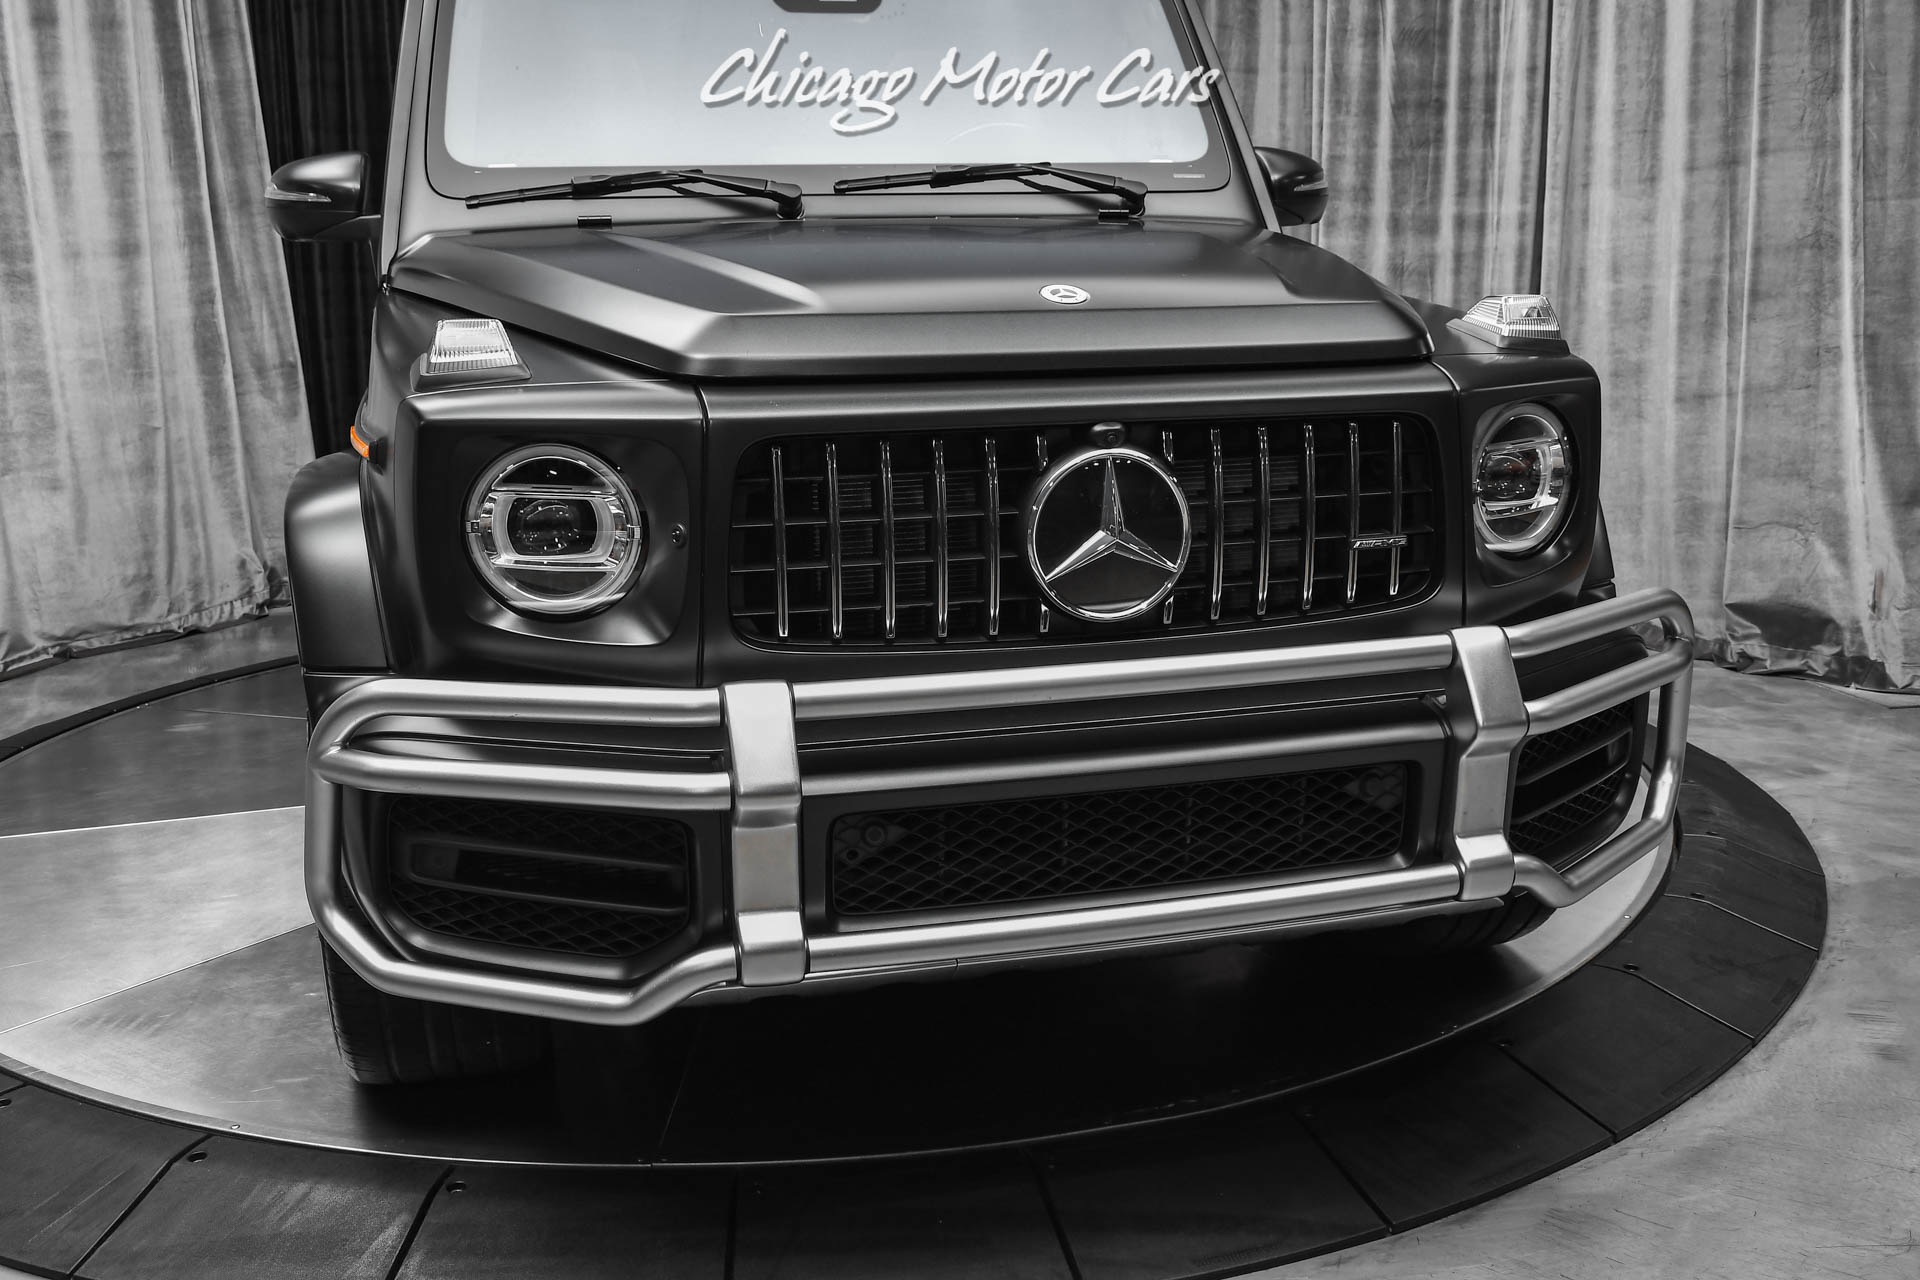 Used-2021-Mercedes-Benz-G63-AMG-SUV-Factory-Matte-Black-Red-Interior-Carbon-Fiber-Exclusive-Pack-LOADED